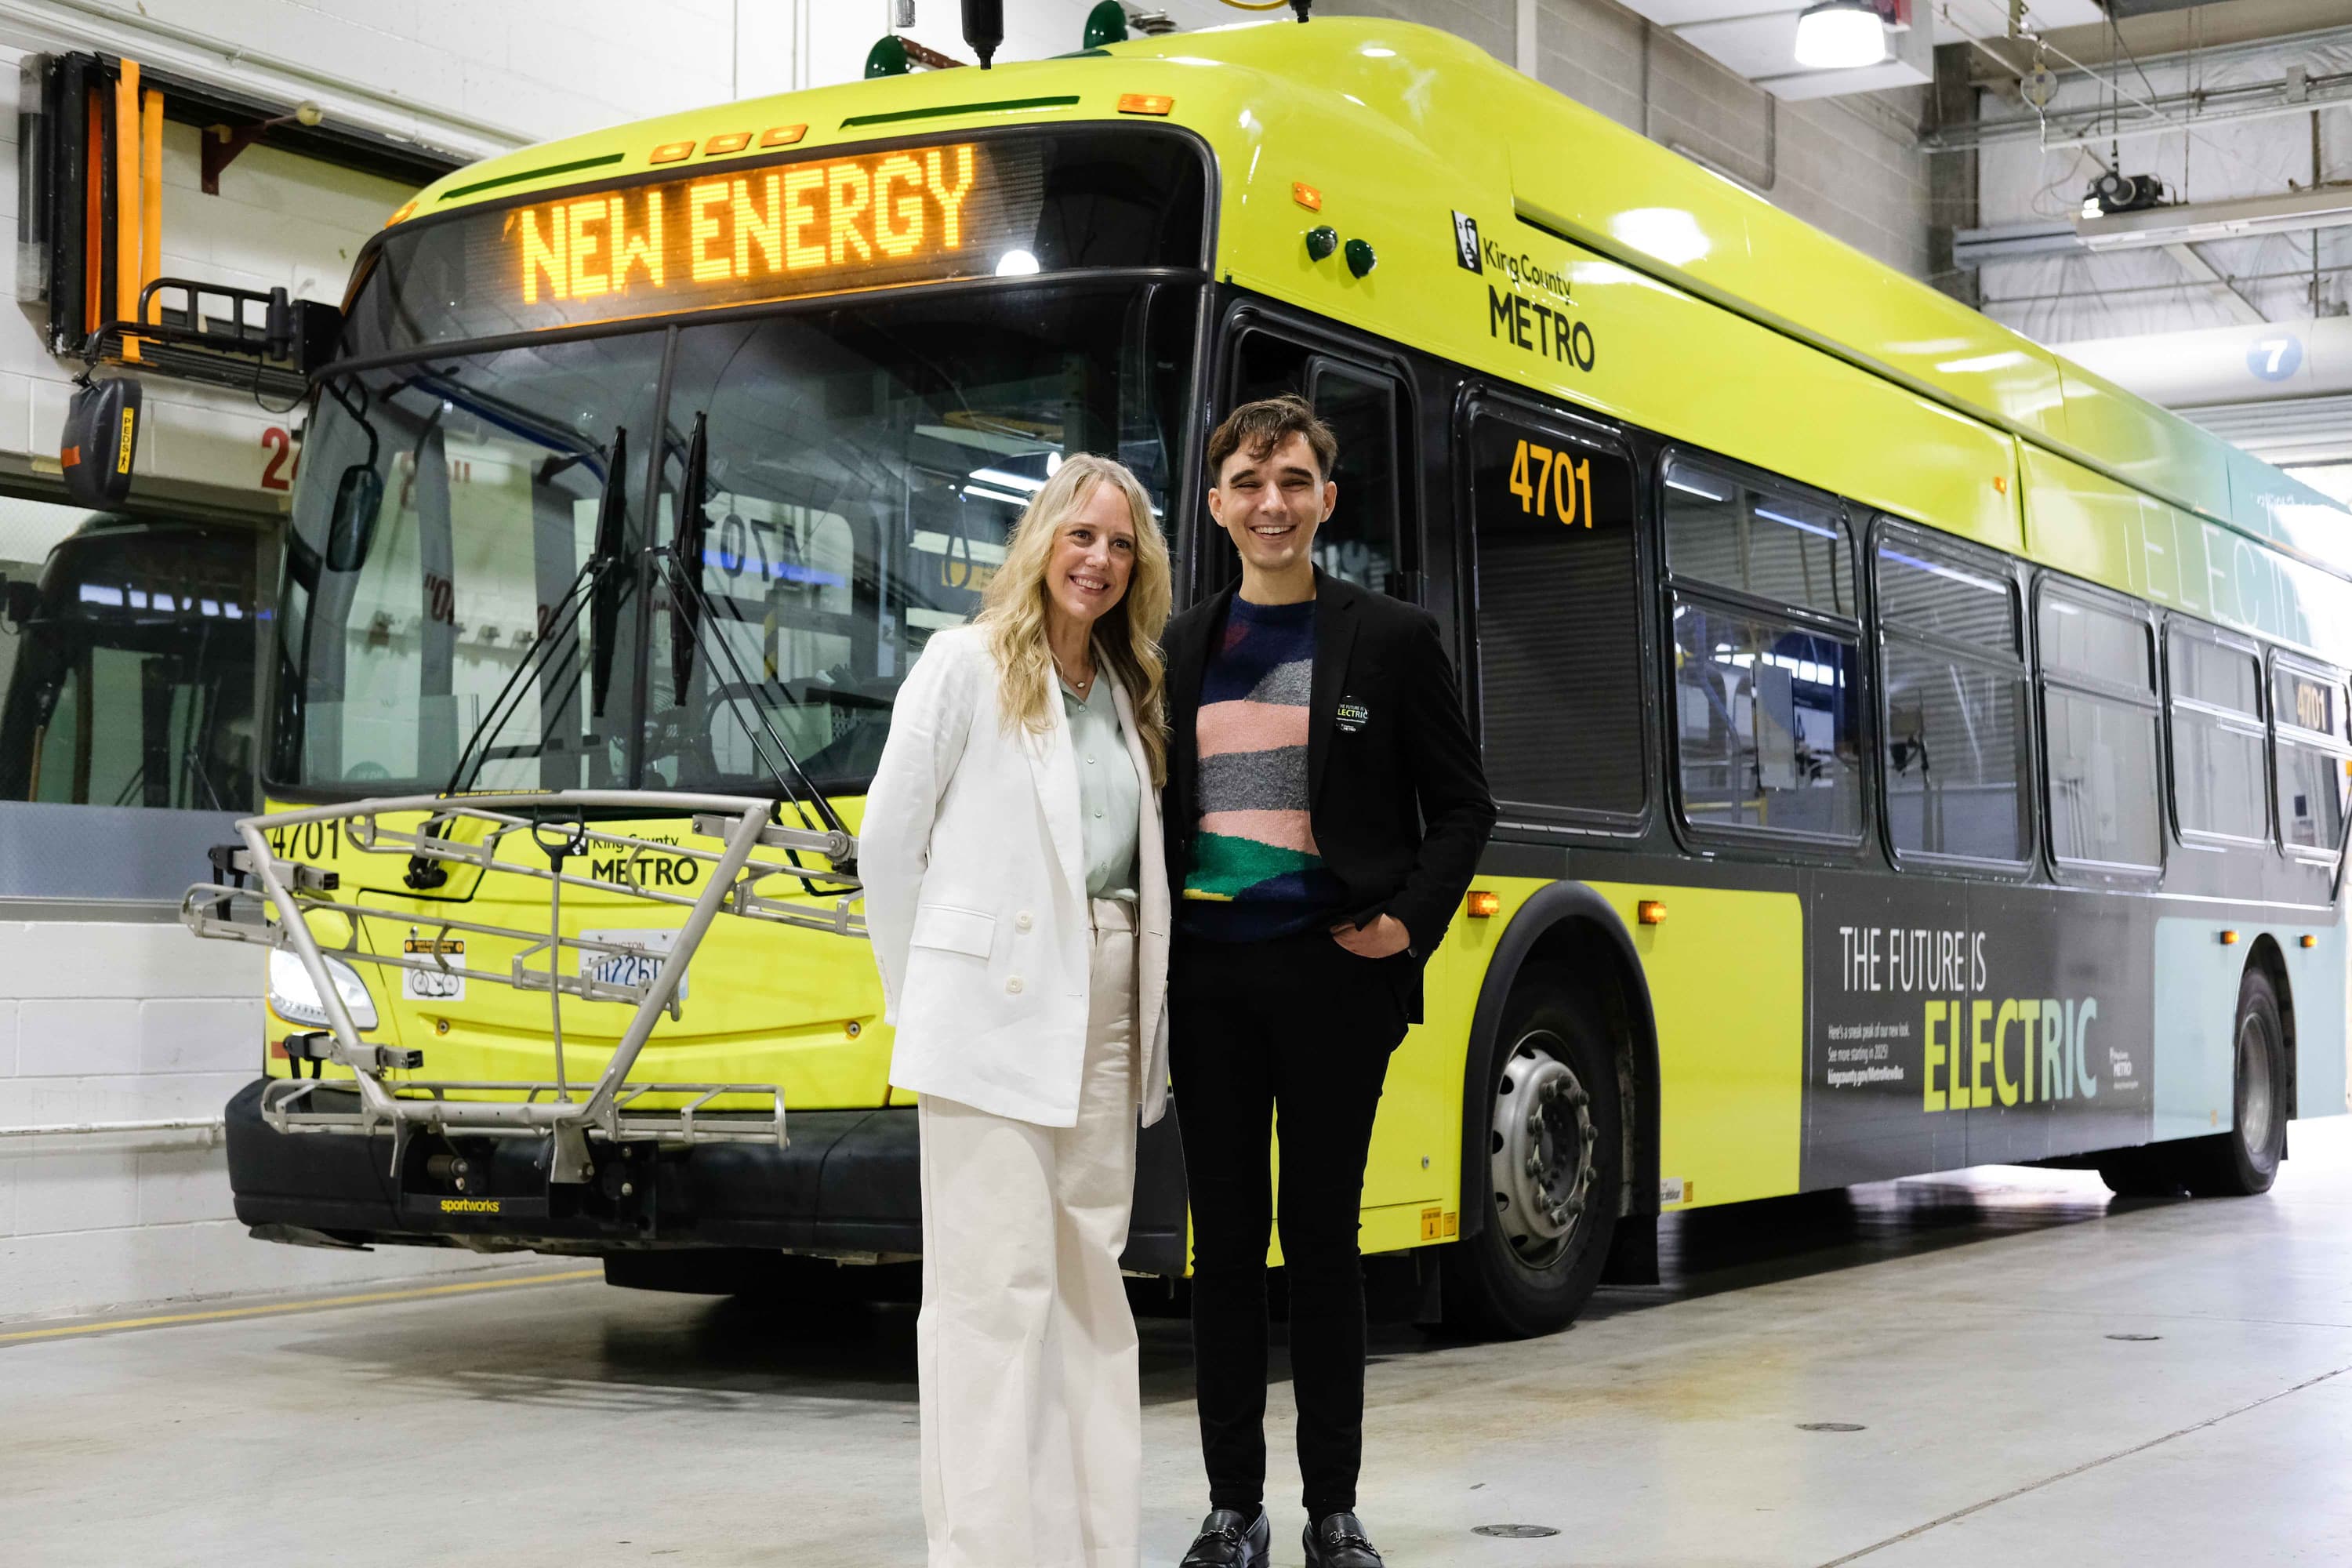 Katie Ryan and Anthony Harding, part of the Teague team that designed the new livery for King County Metro, stand in front of the yellow city bus.